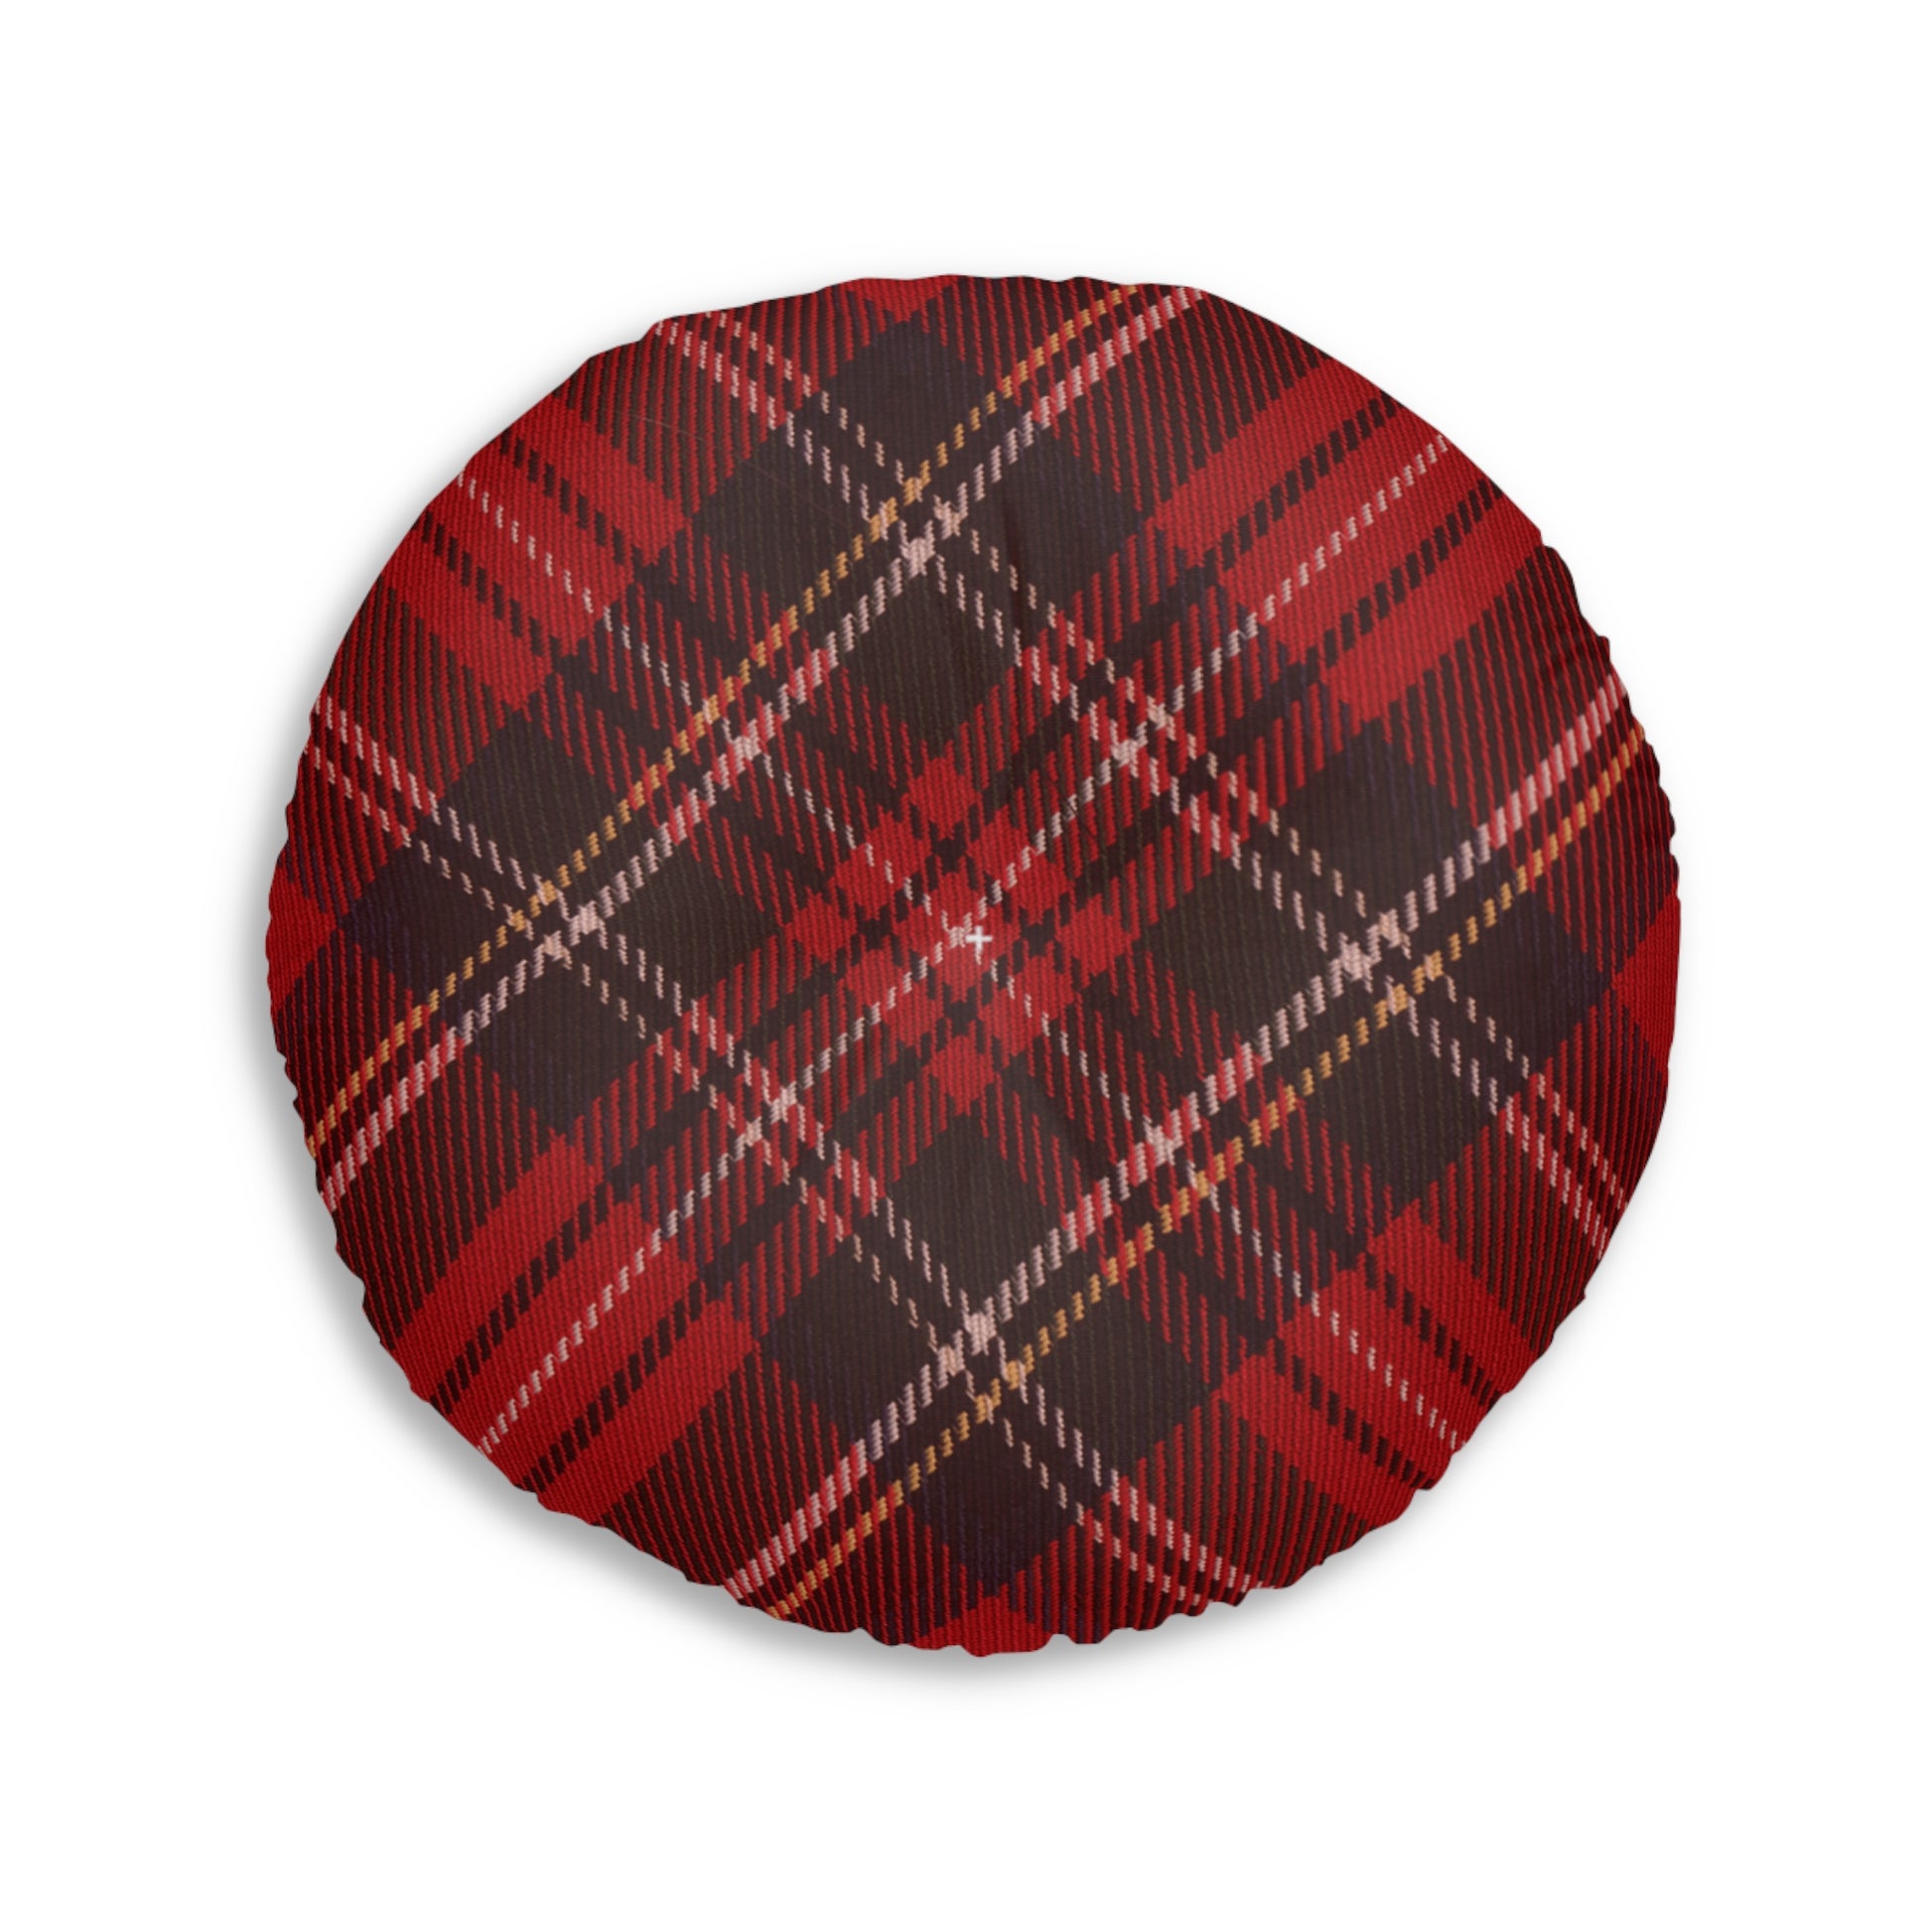 A comfortable Plaid Tufted Floor-Pillow from Printify with a plaid pattern in red and black.